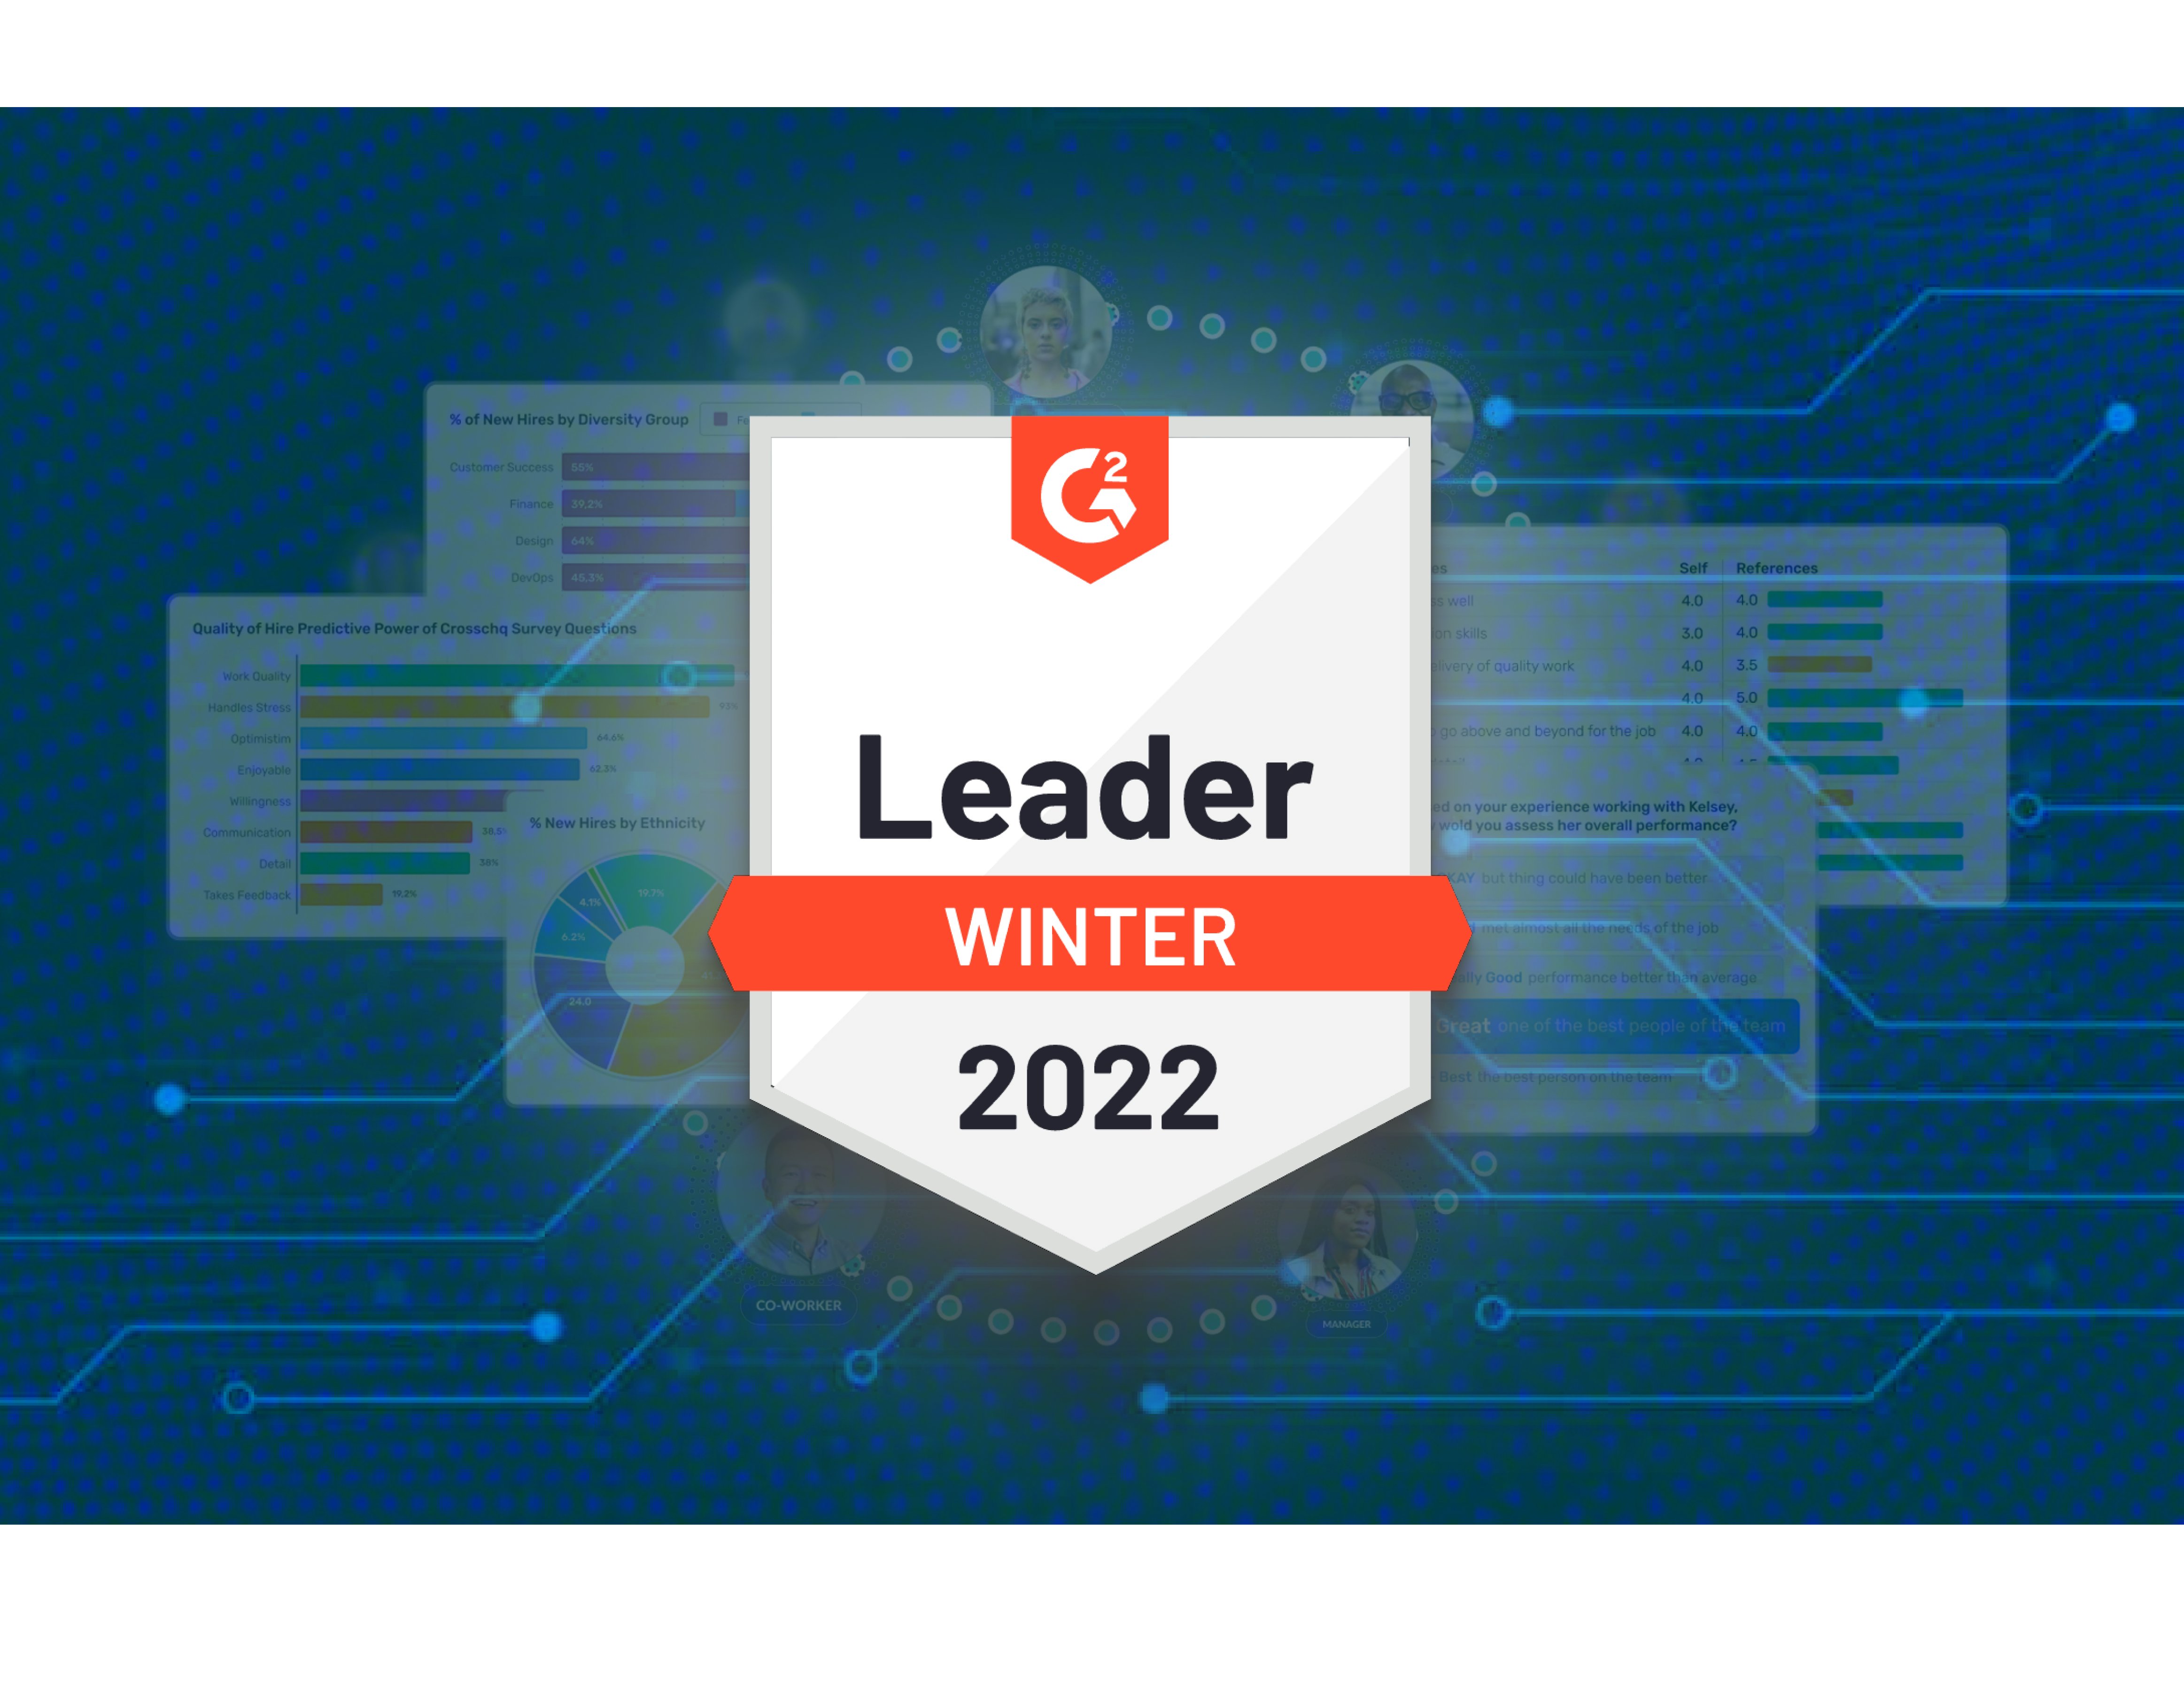 Crosschq Sweeps The Table and Named a Leader Overall in the G2 Reference Check Software Winter 2022 Report